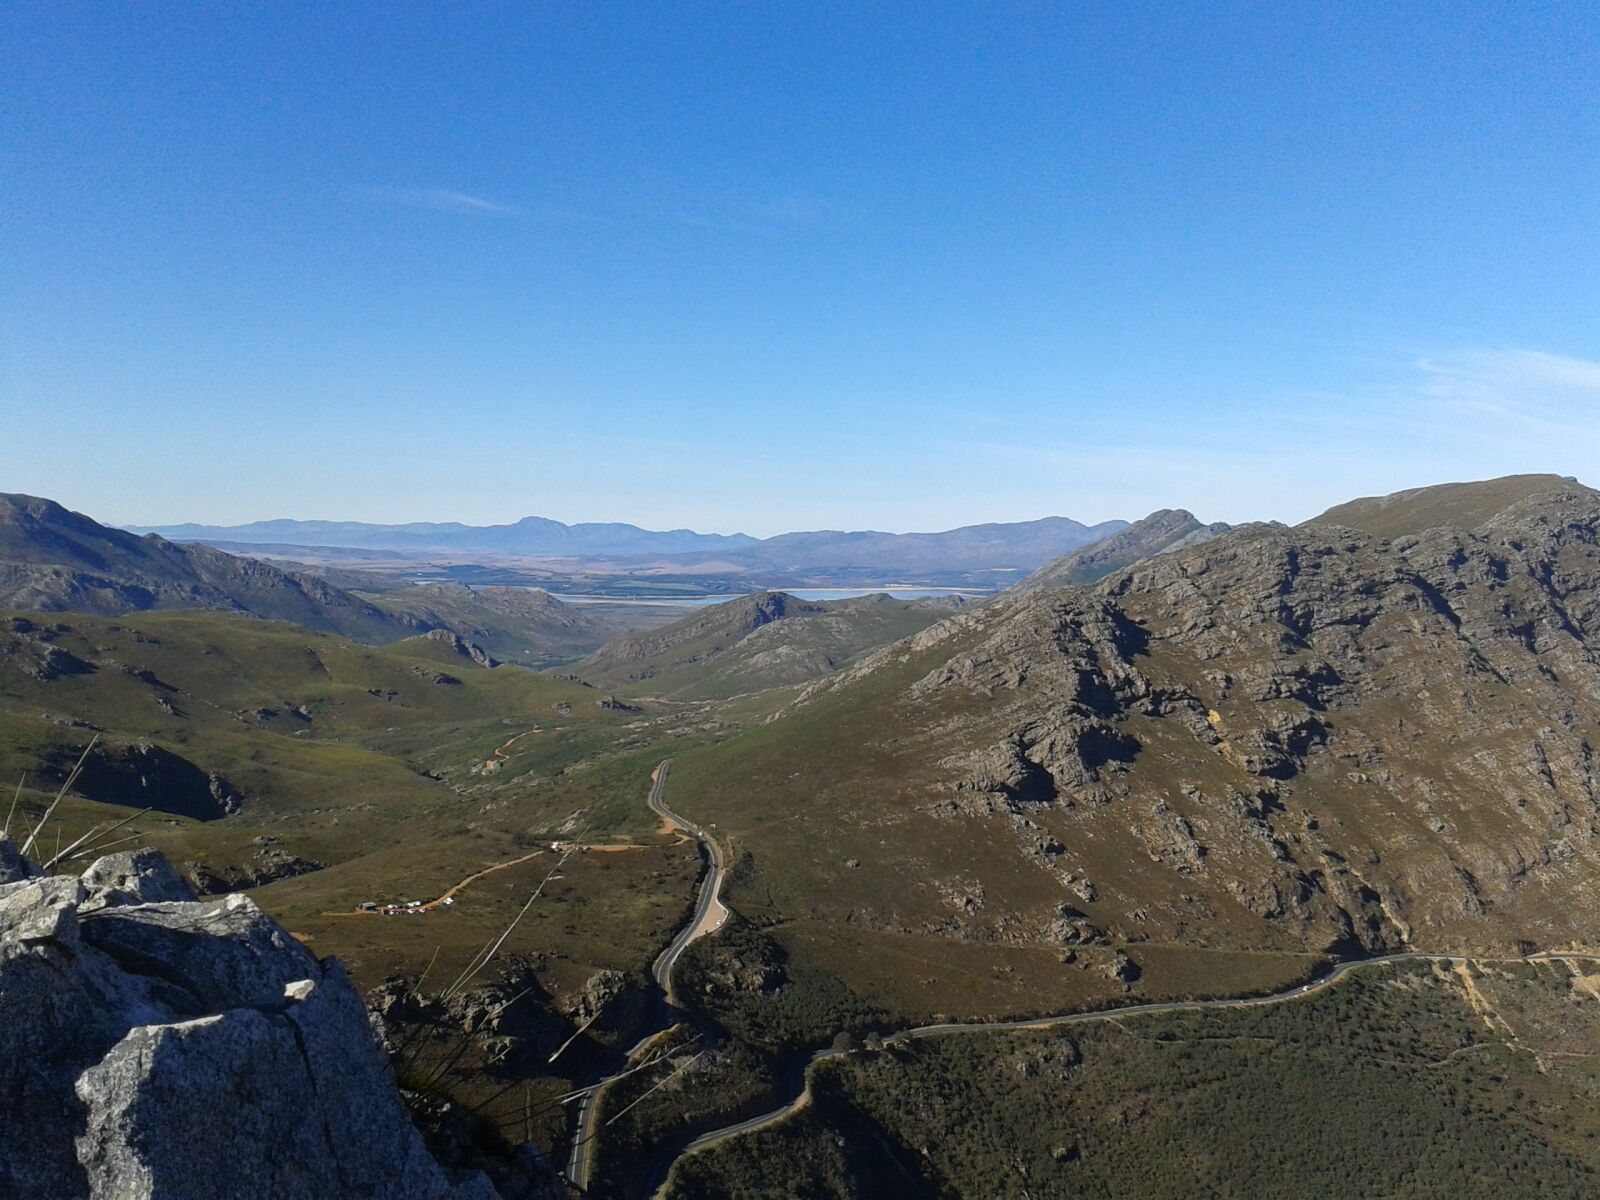 Samsung Galaxy S3 Mini sample photo. South africa, landscape, mountain photography